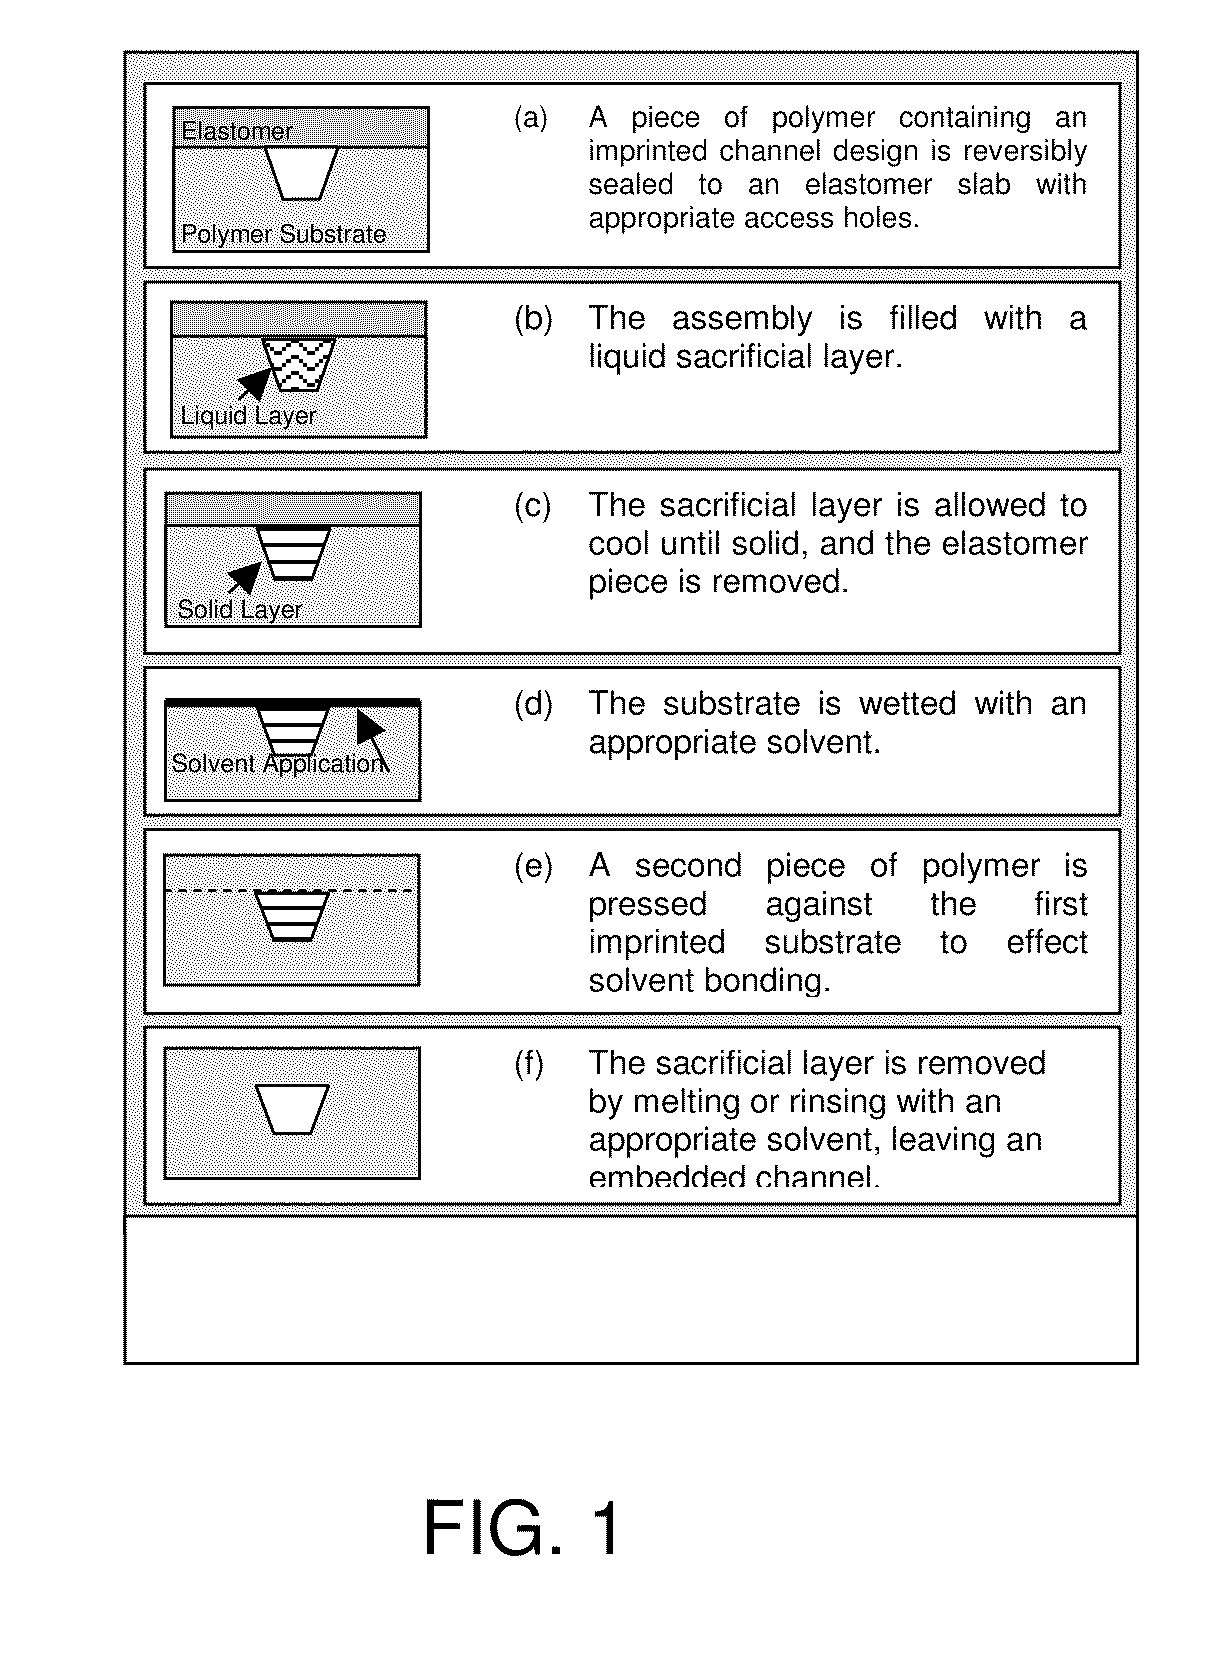 Phase-changing sacrificial materials for manufacture of high-performance polymeric capillary microchips